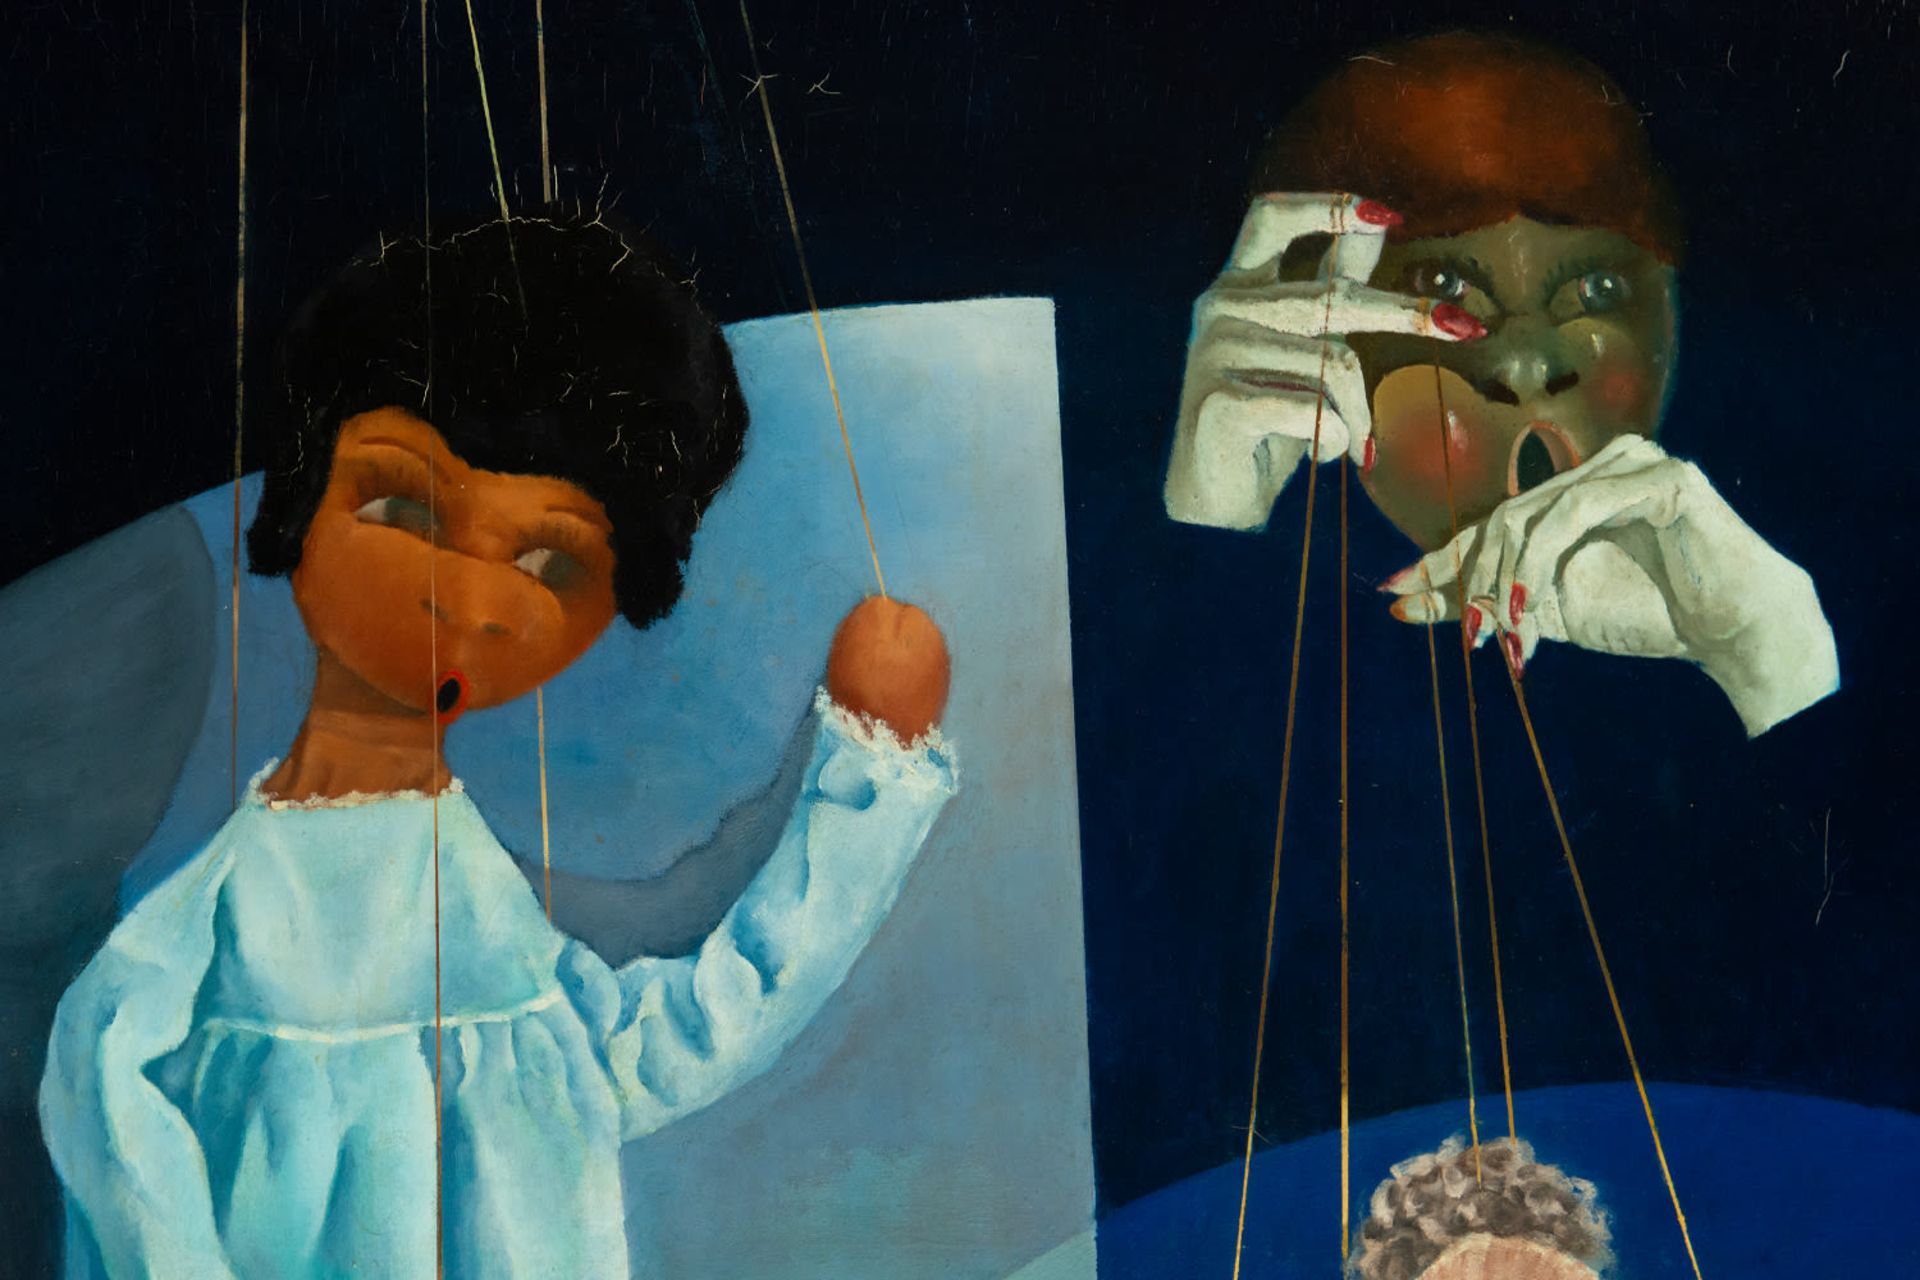 Puppets, abstract composition, Spanish school of the 20th century - Image 4 of 6